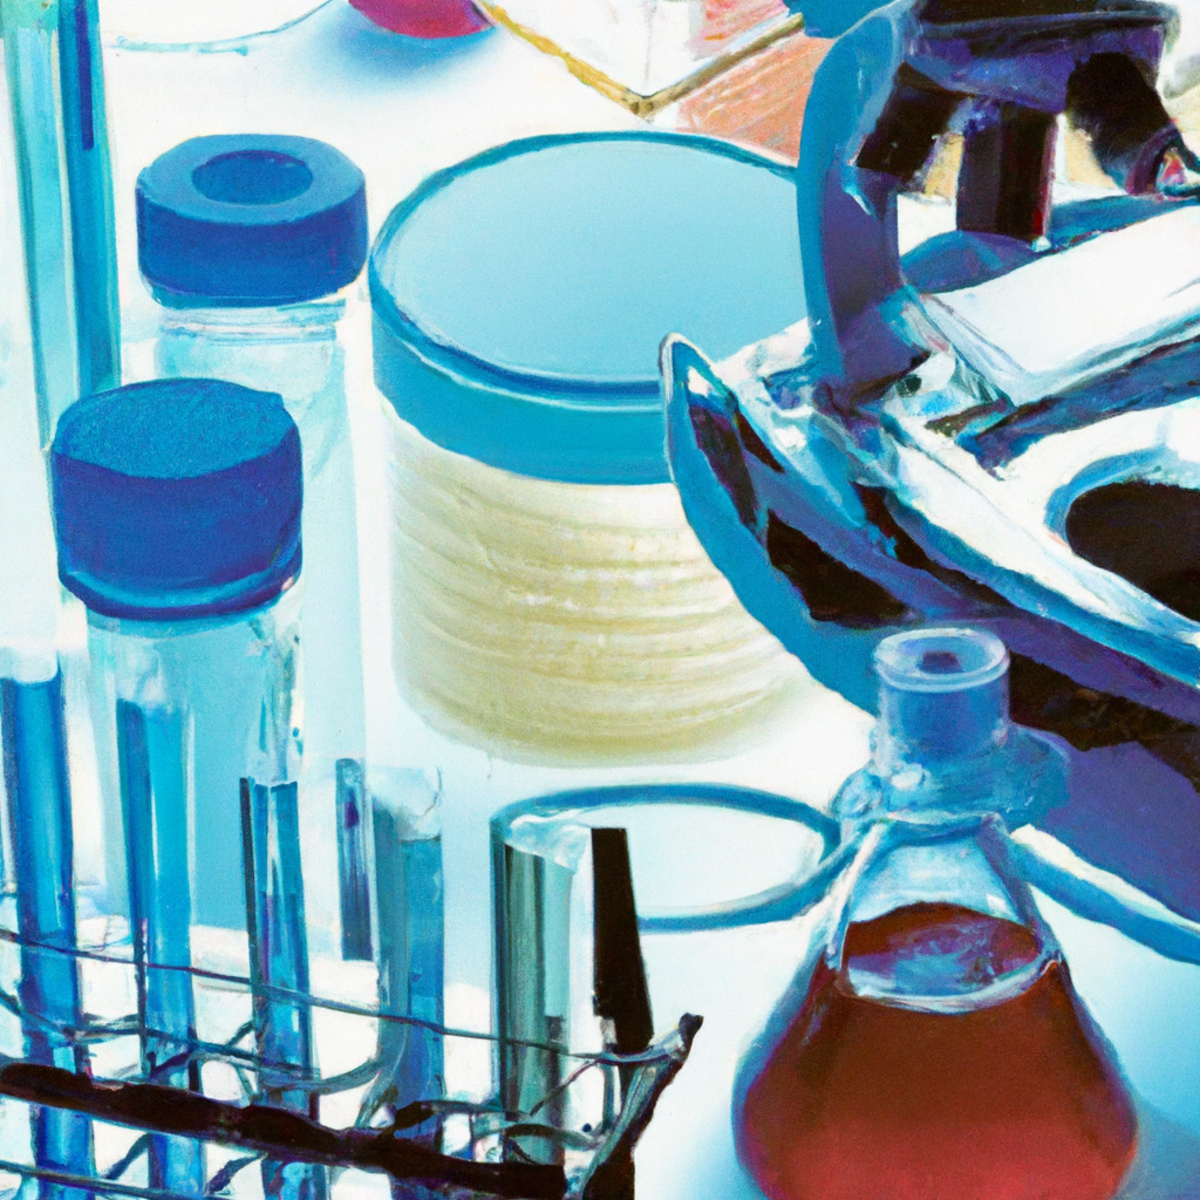 Scientific equipment in a lab setting, representing genetic research and analysis for Floating-Harbor Syndrome.